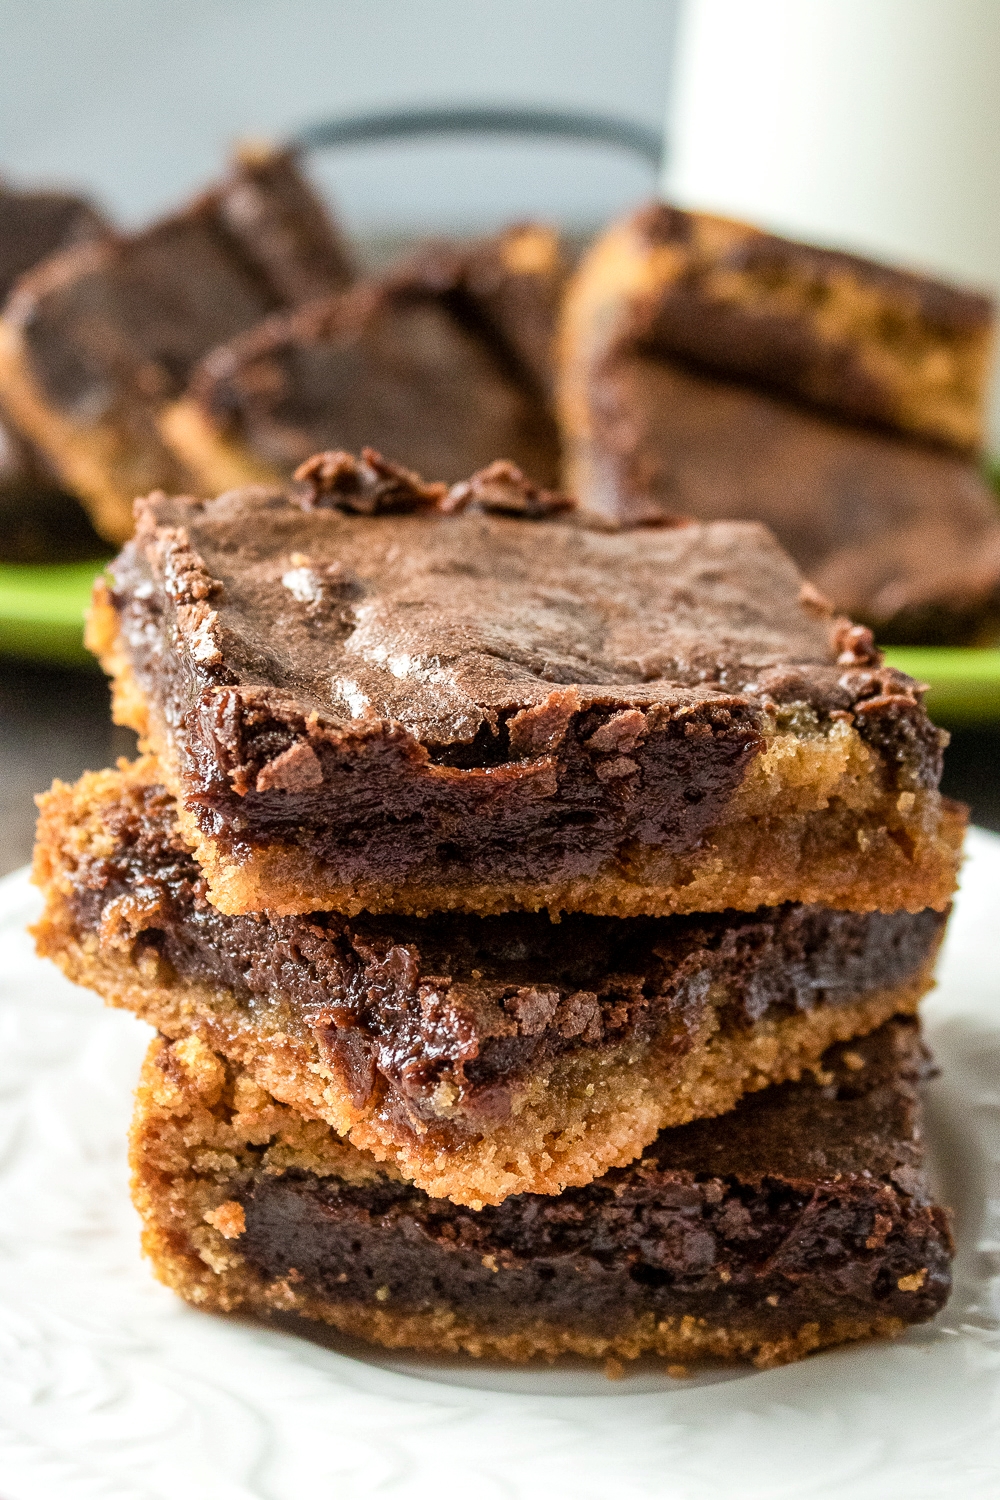 If you love peanut butter and chocolate, this peanut butter brownies recipe is for you! They're chewy, fudgy, rich, and oh so delicious!